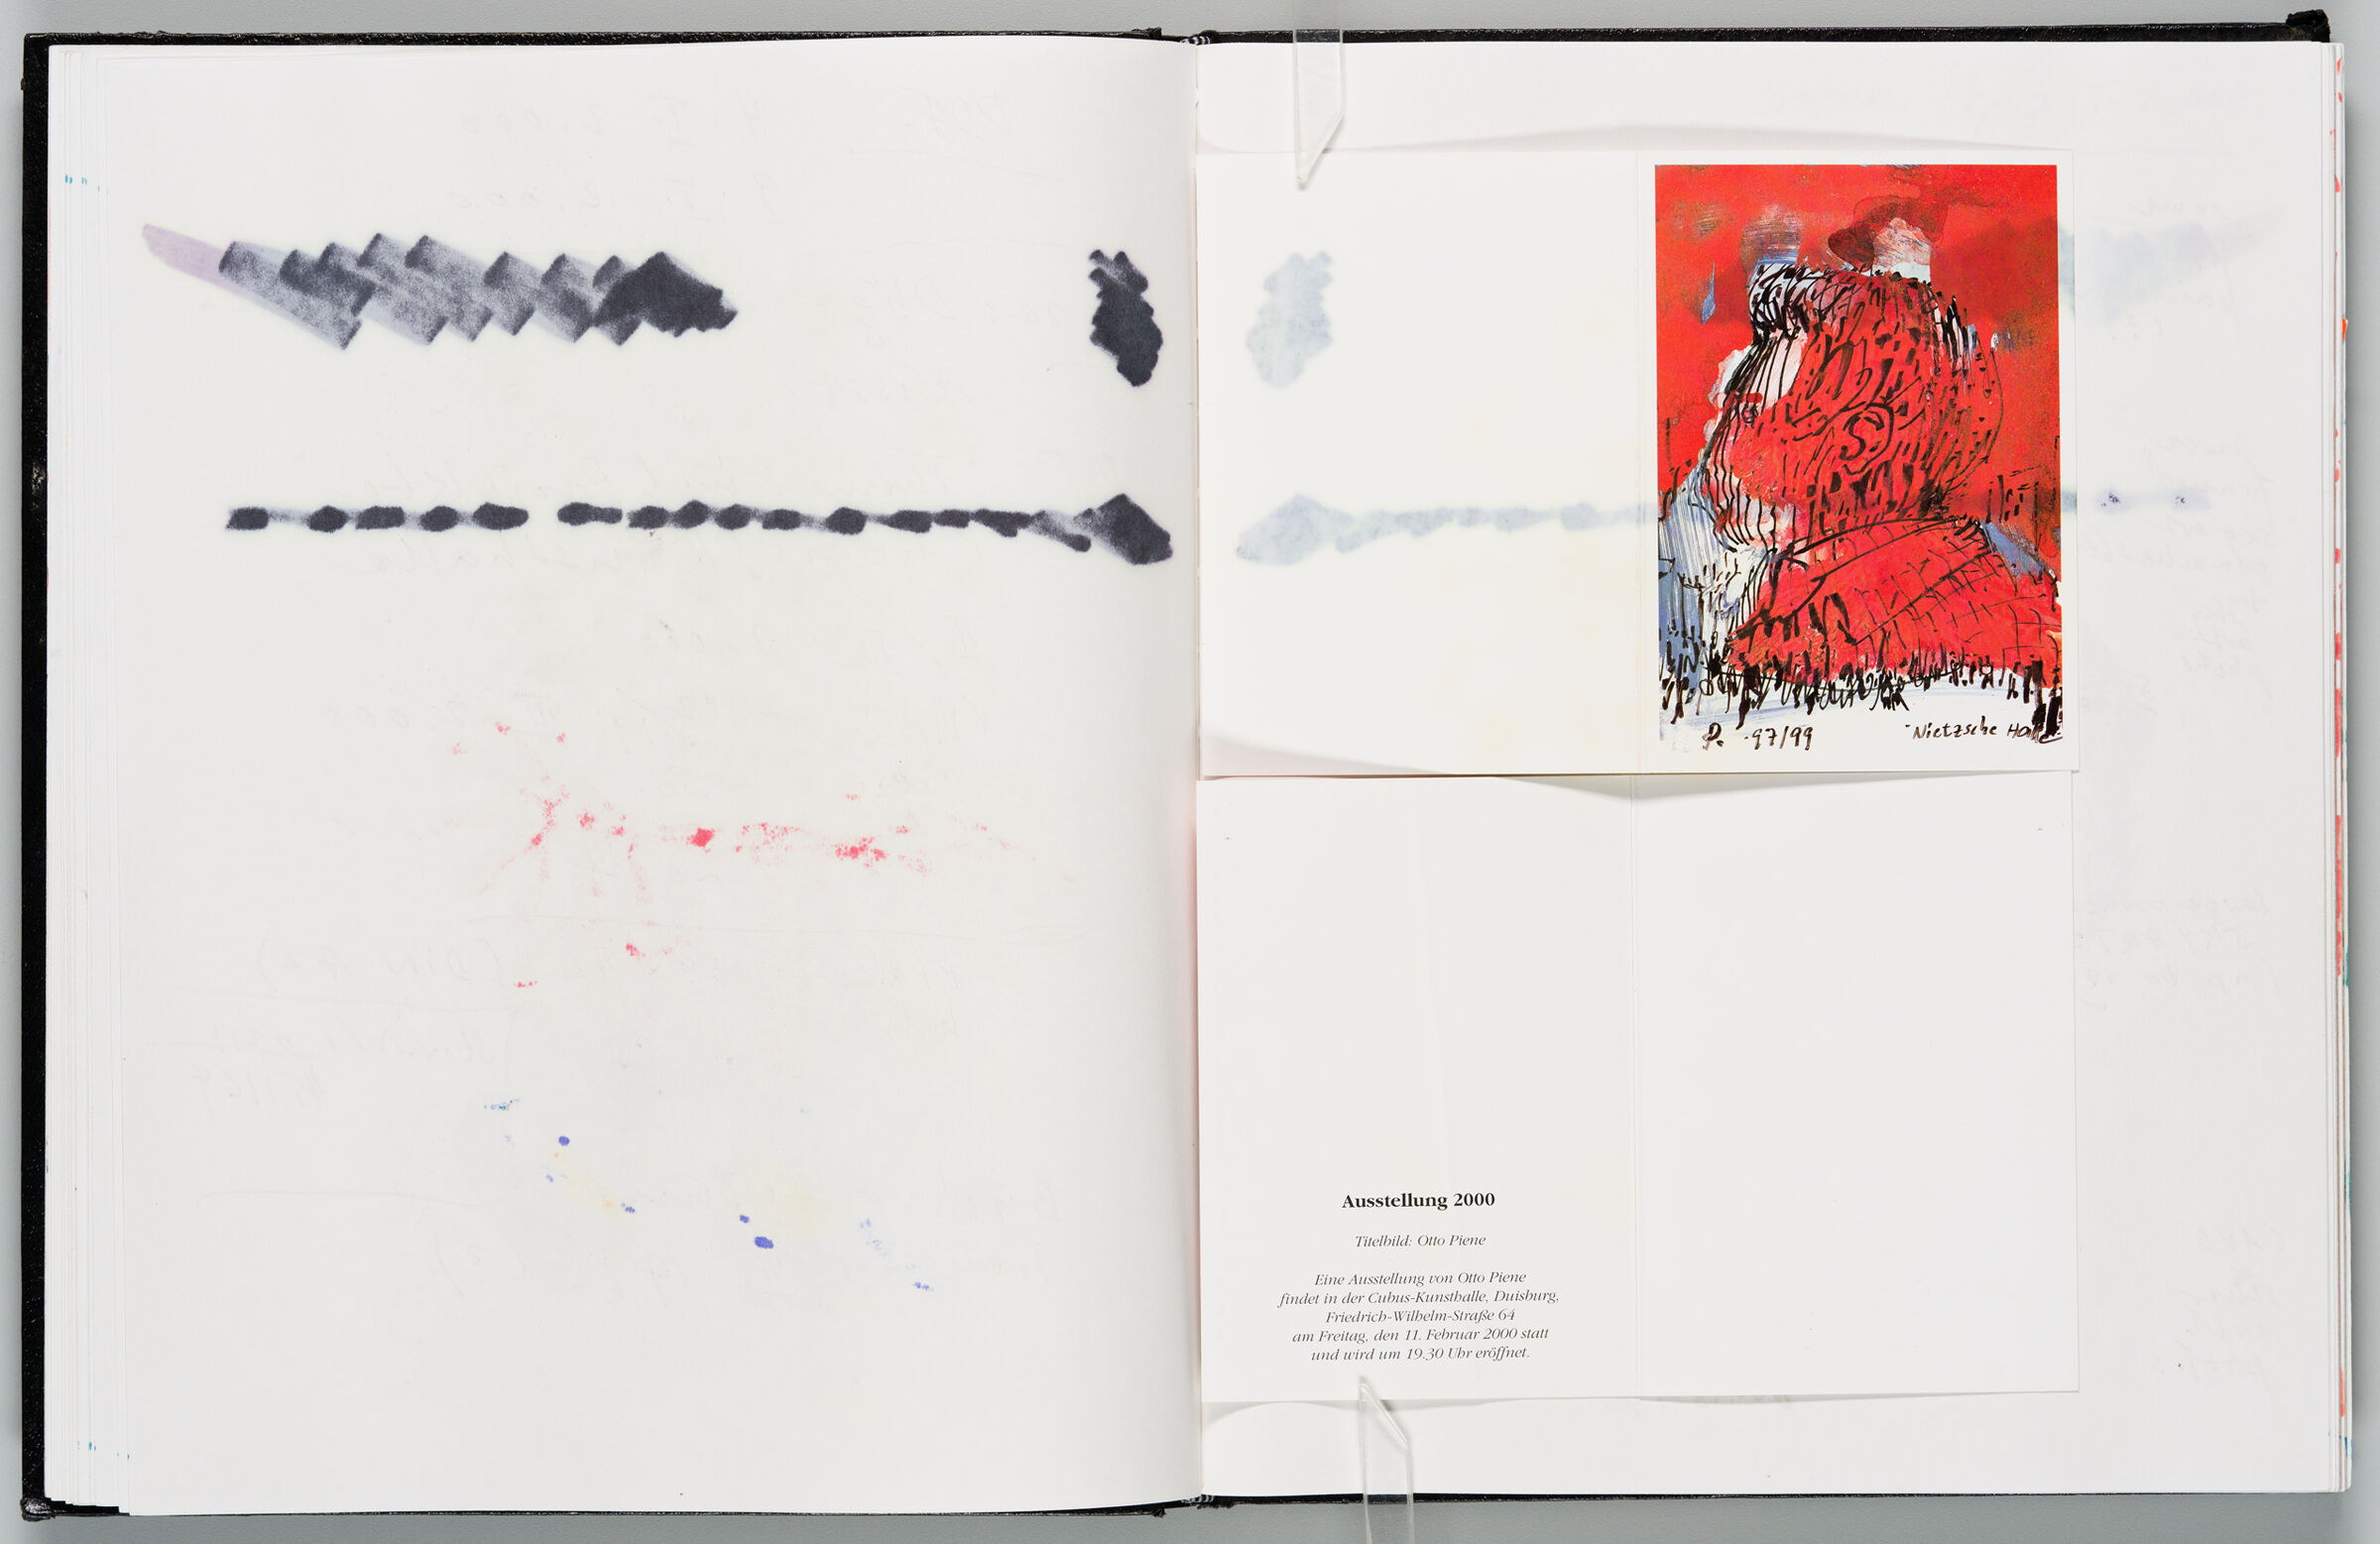 Untitled (Bleed-Through Of Previous Page, Left Page); Untitled (Adhered Invitation Cards For Cubus-Kunsthalle In Duisburg, Right Page)